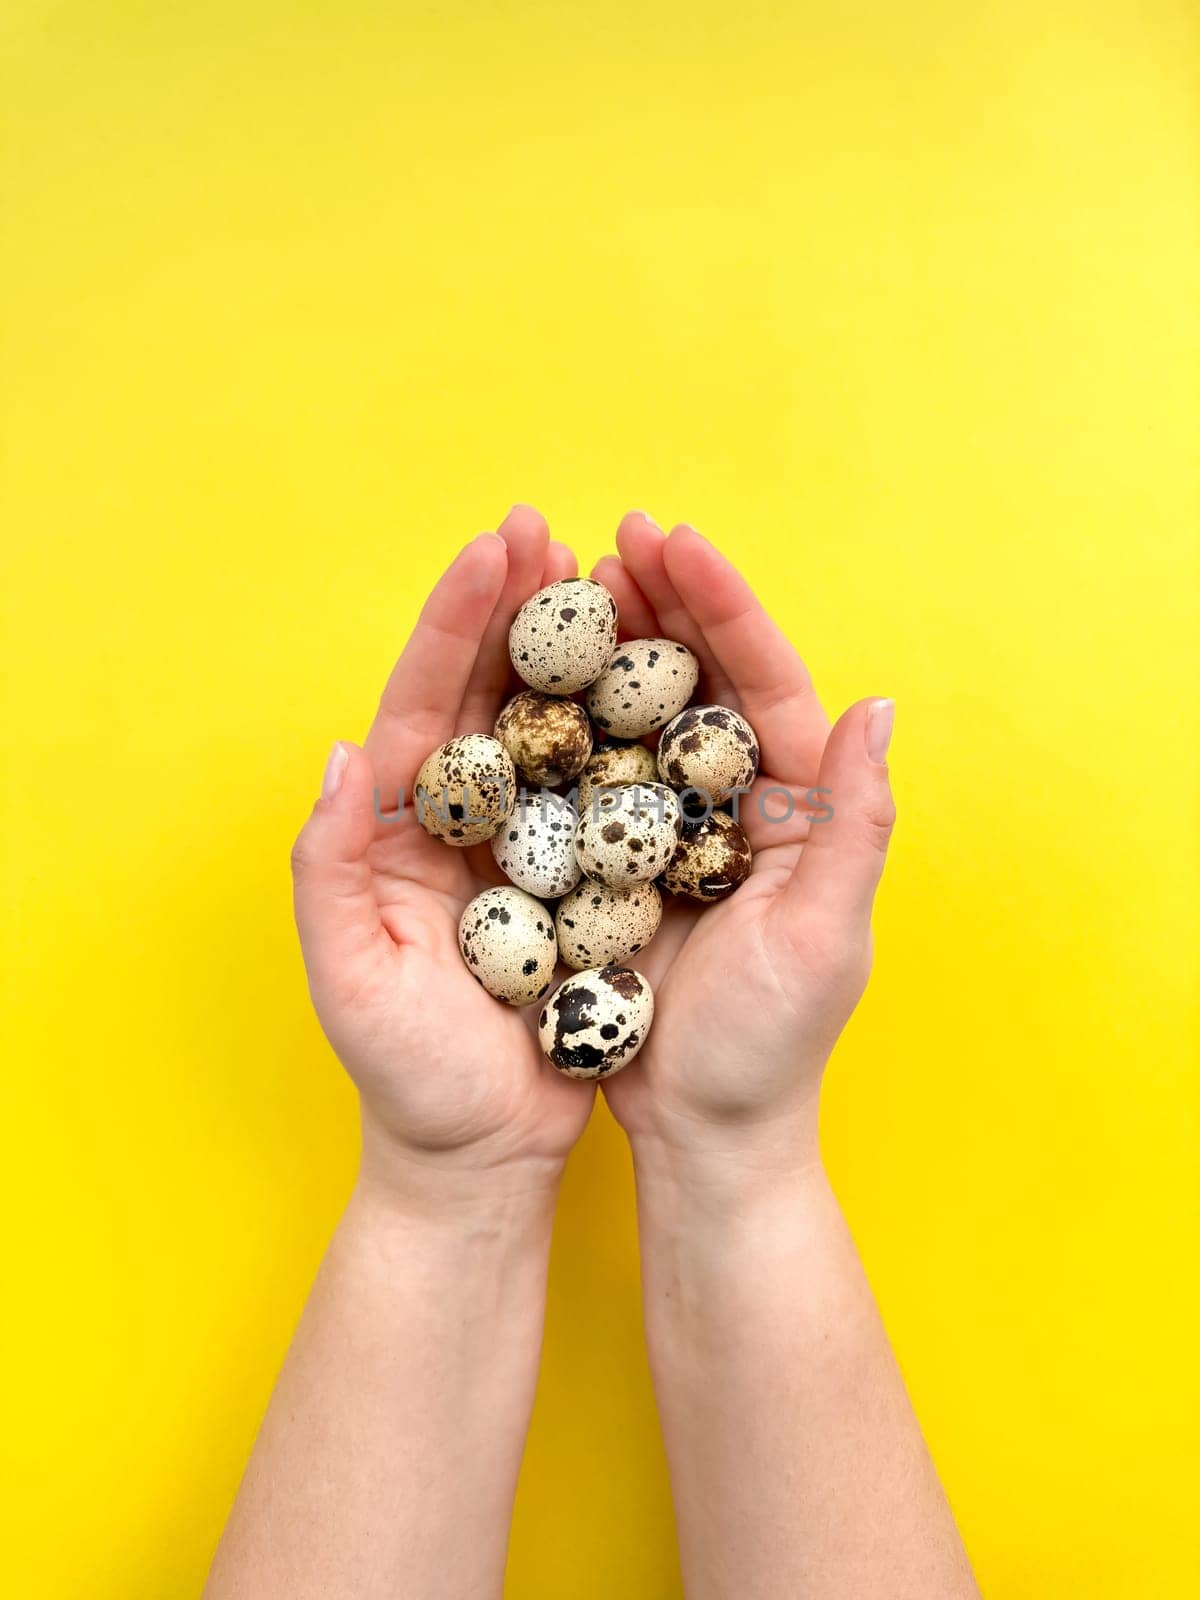 Hands presenting quail eggs against vibrant yellow background, depicting concepts of organic produce and Easter decorations with space for text. by Lunnica